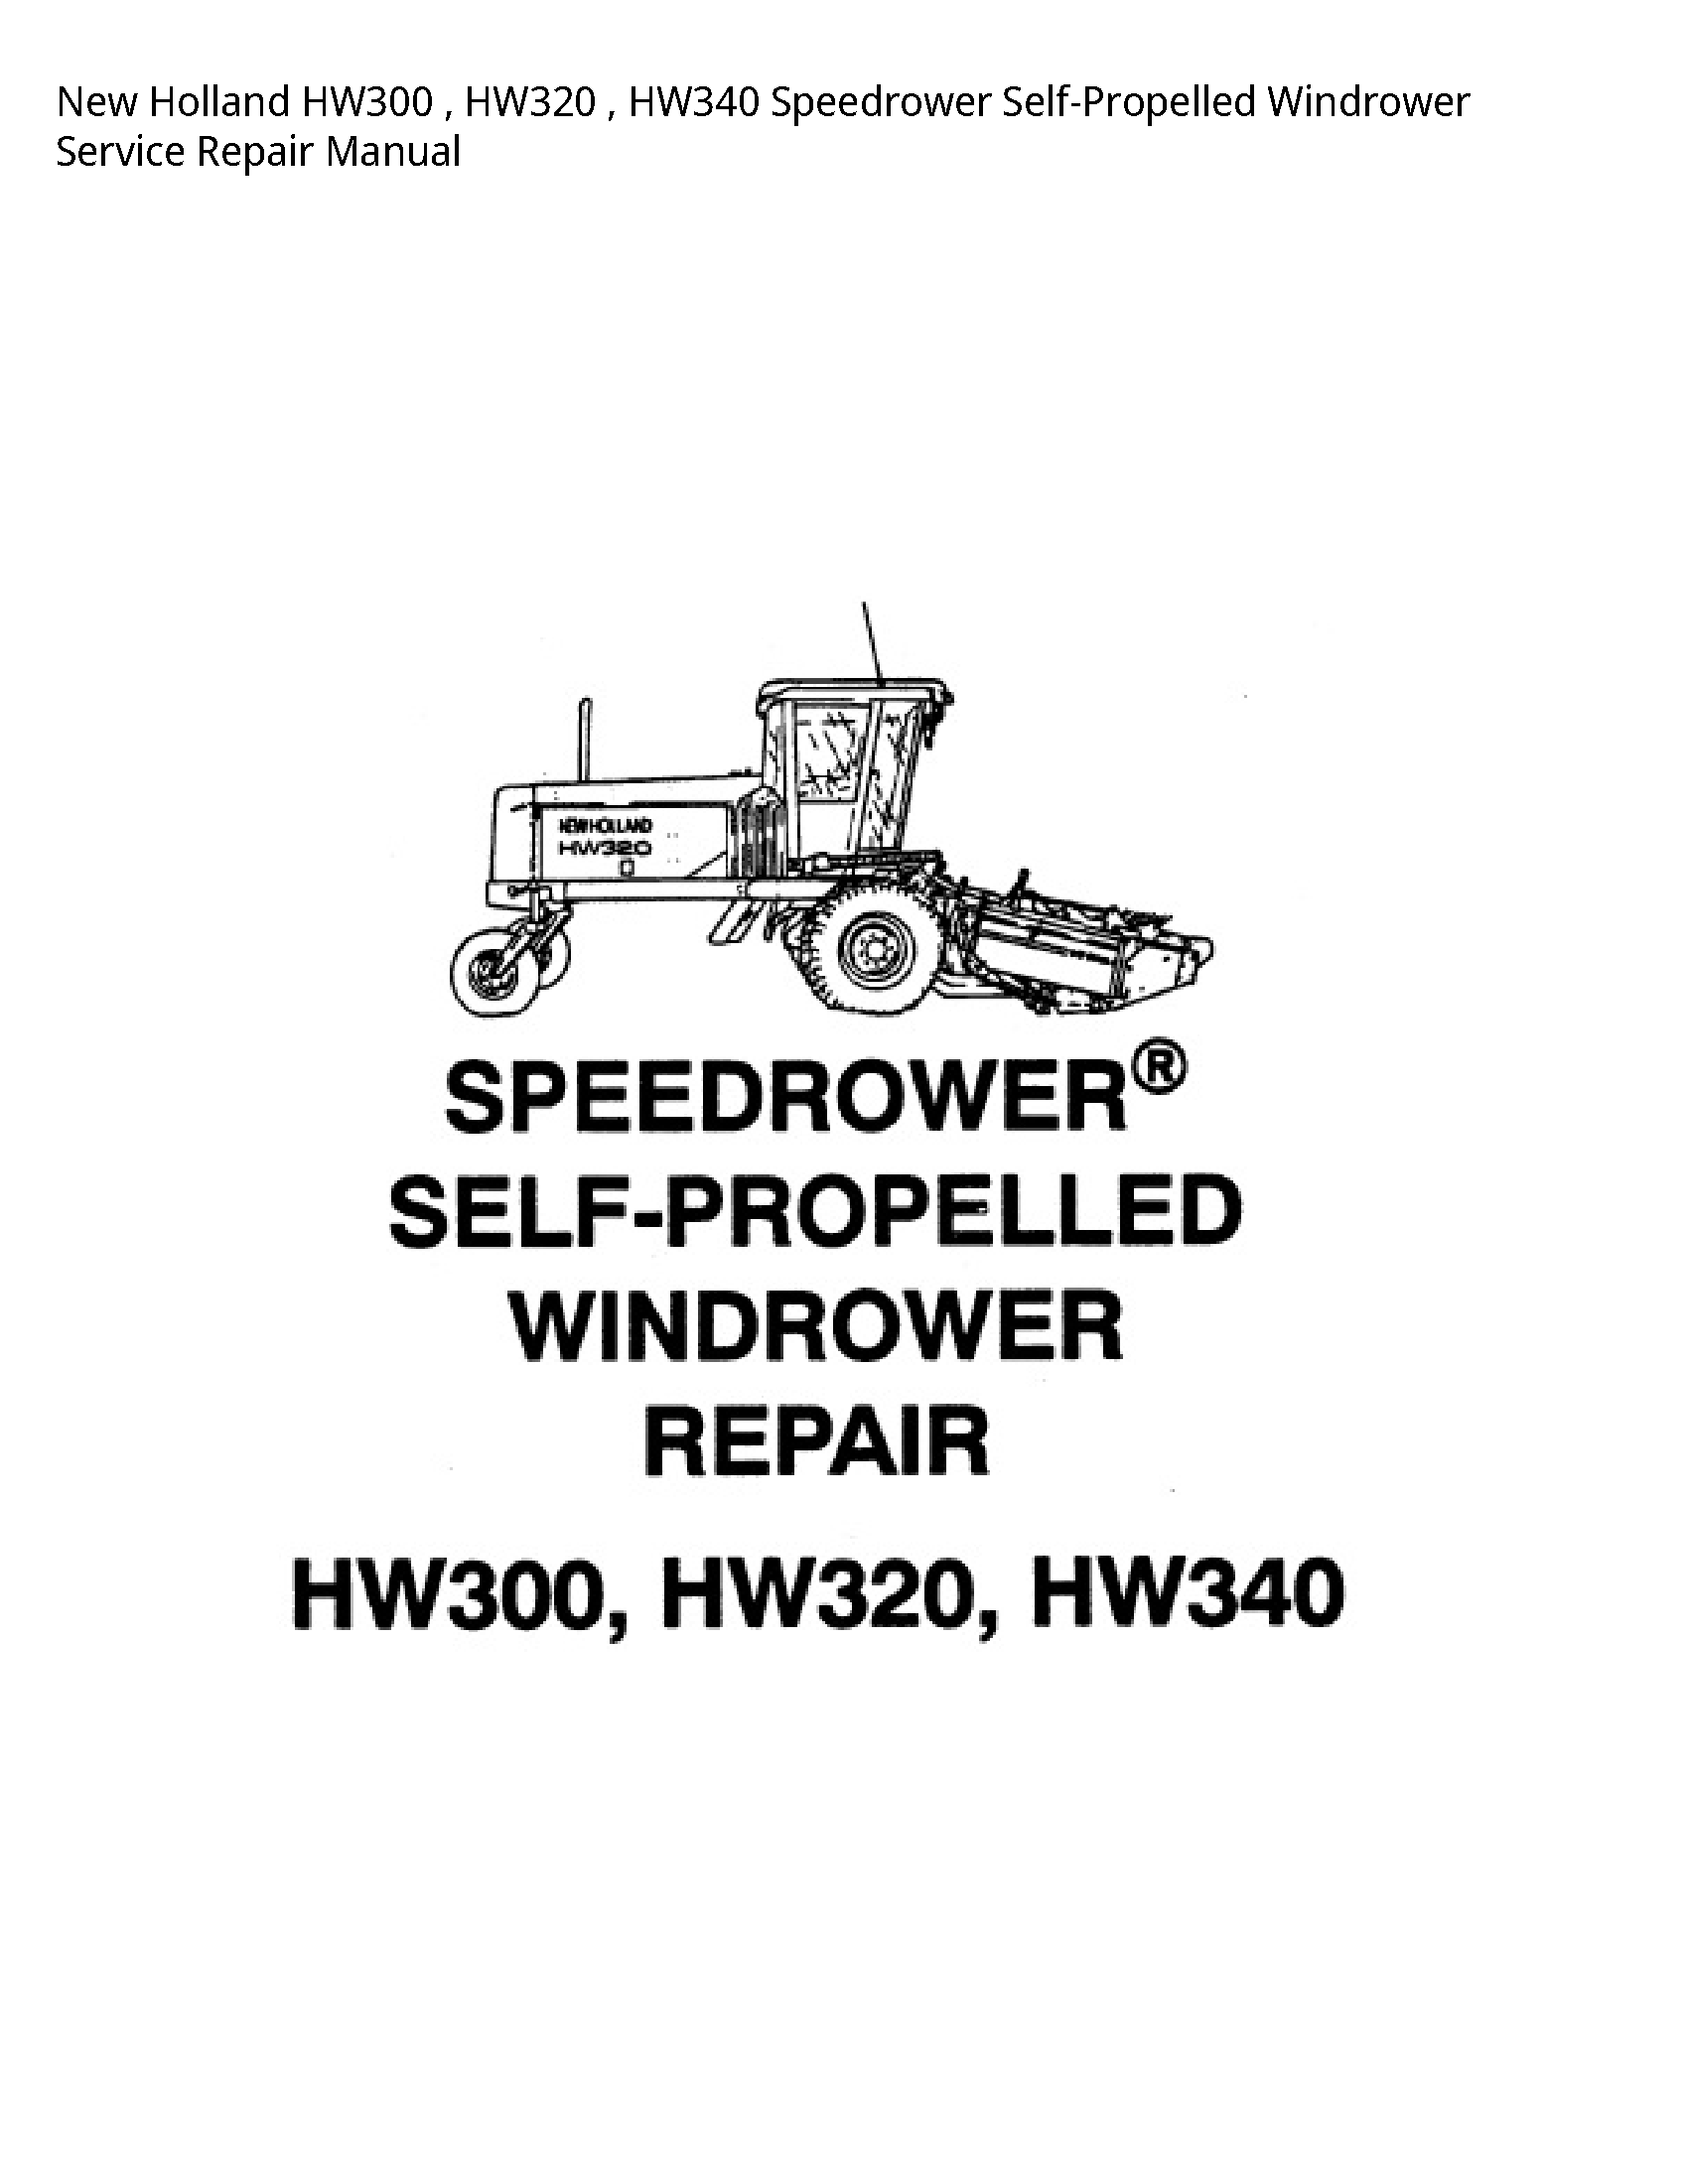 New Holland HW300 Speedrower Self-Propelled Windrower manual